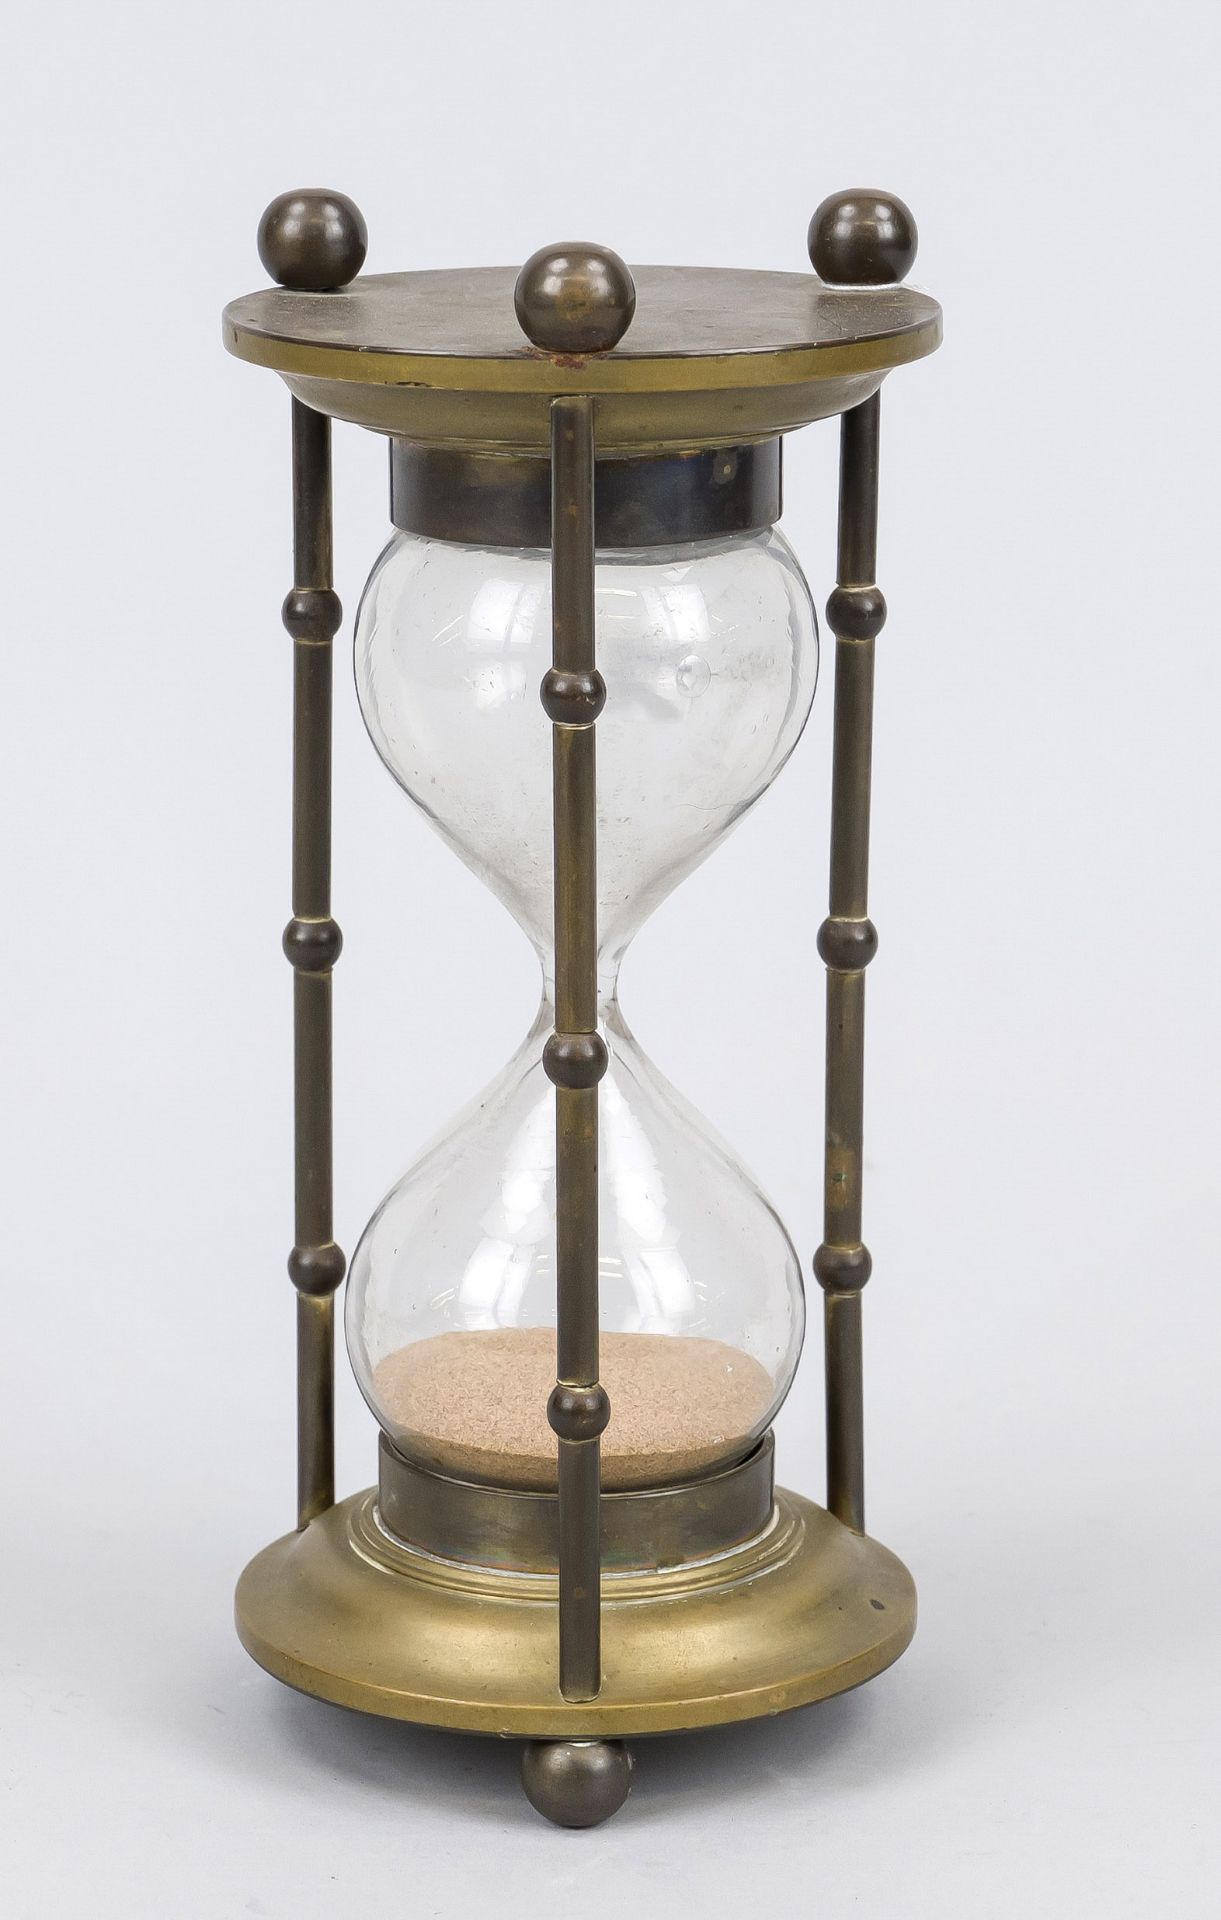 Hour glass, dandy clock, late 19th century Glass with sand in bronze/brass frame. Slightly rubbed